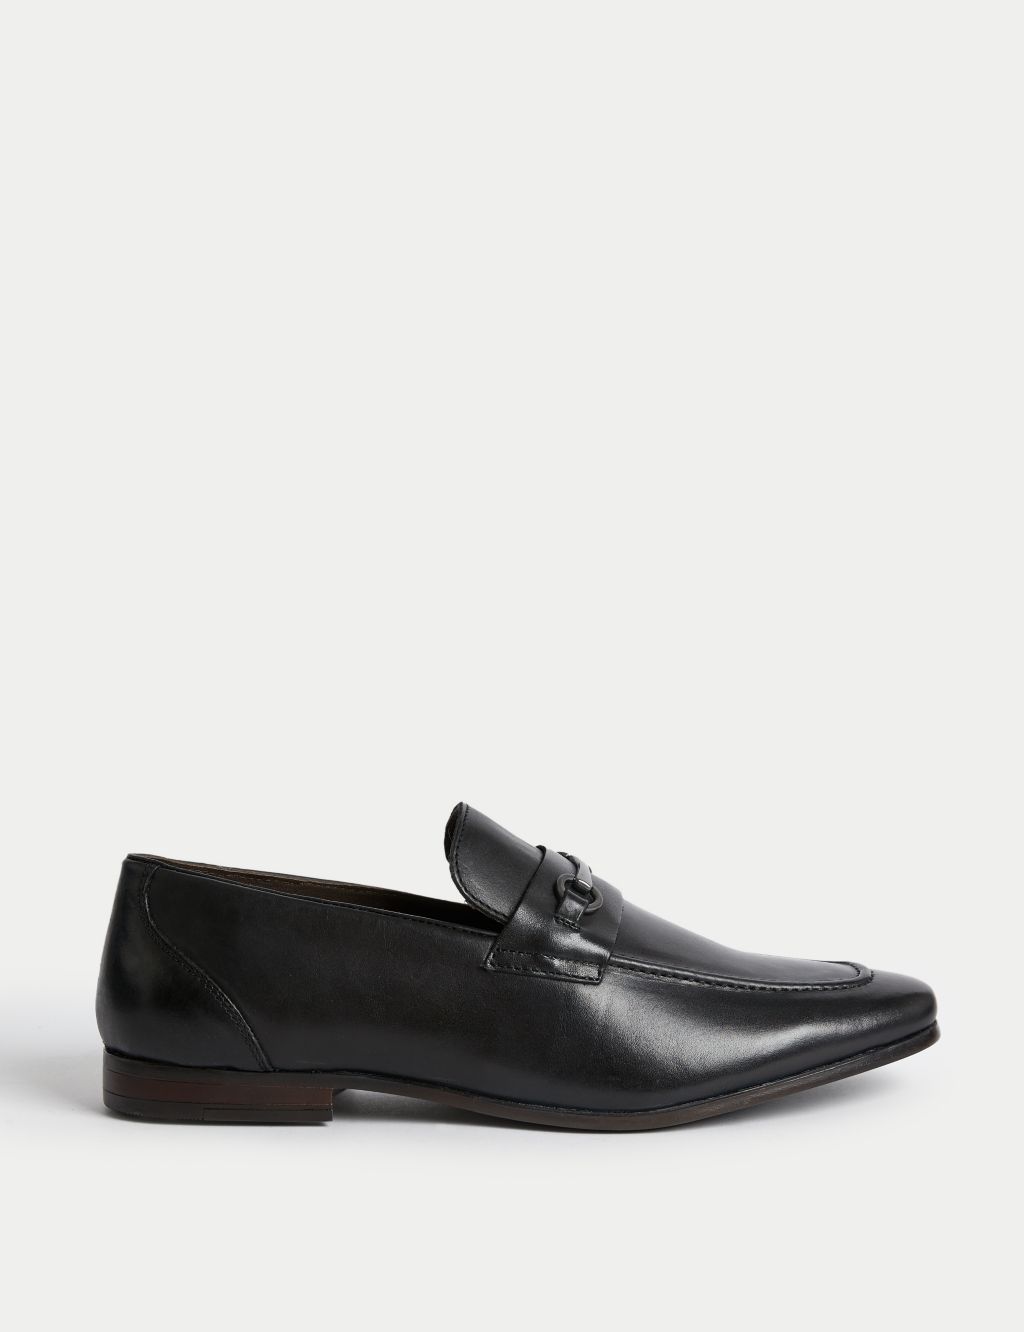 Leather Slip-On Loafers image 1